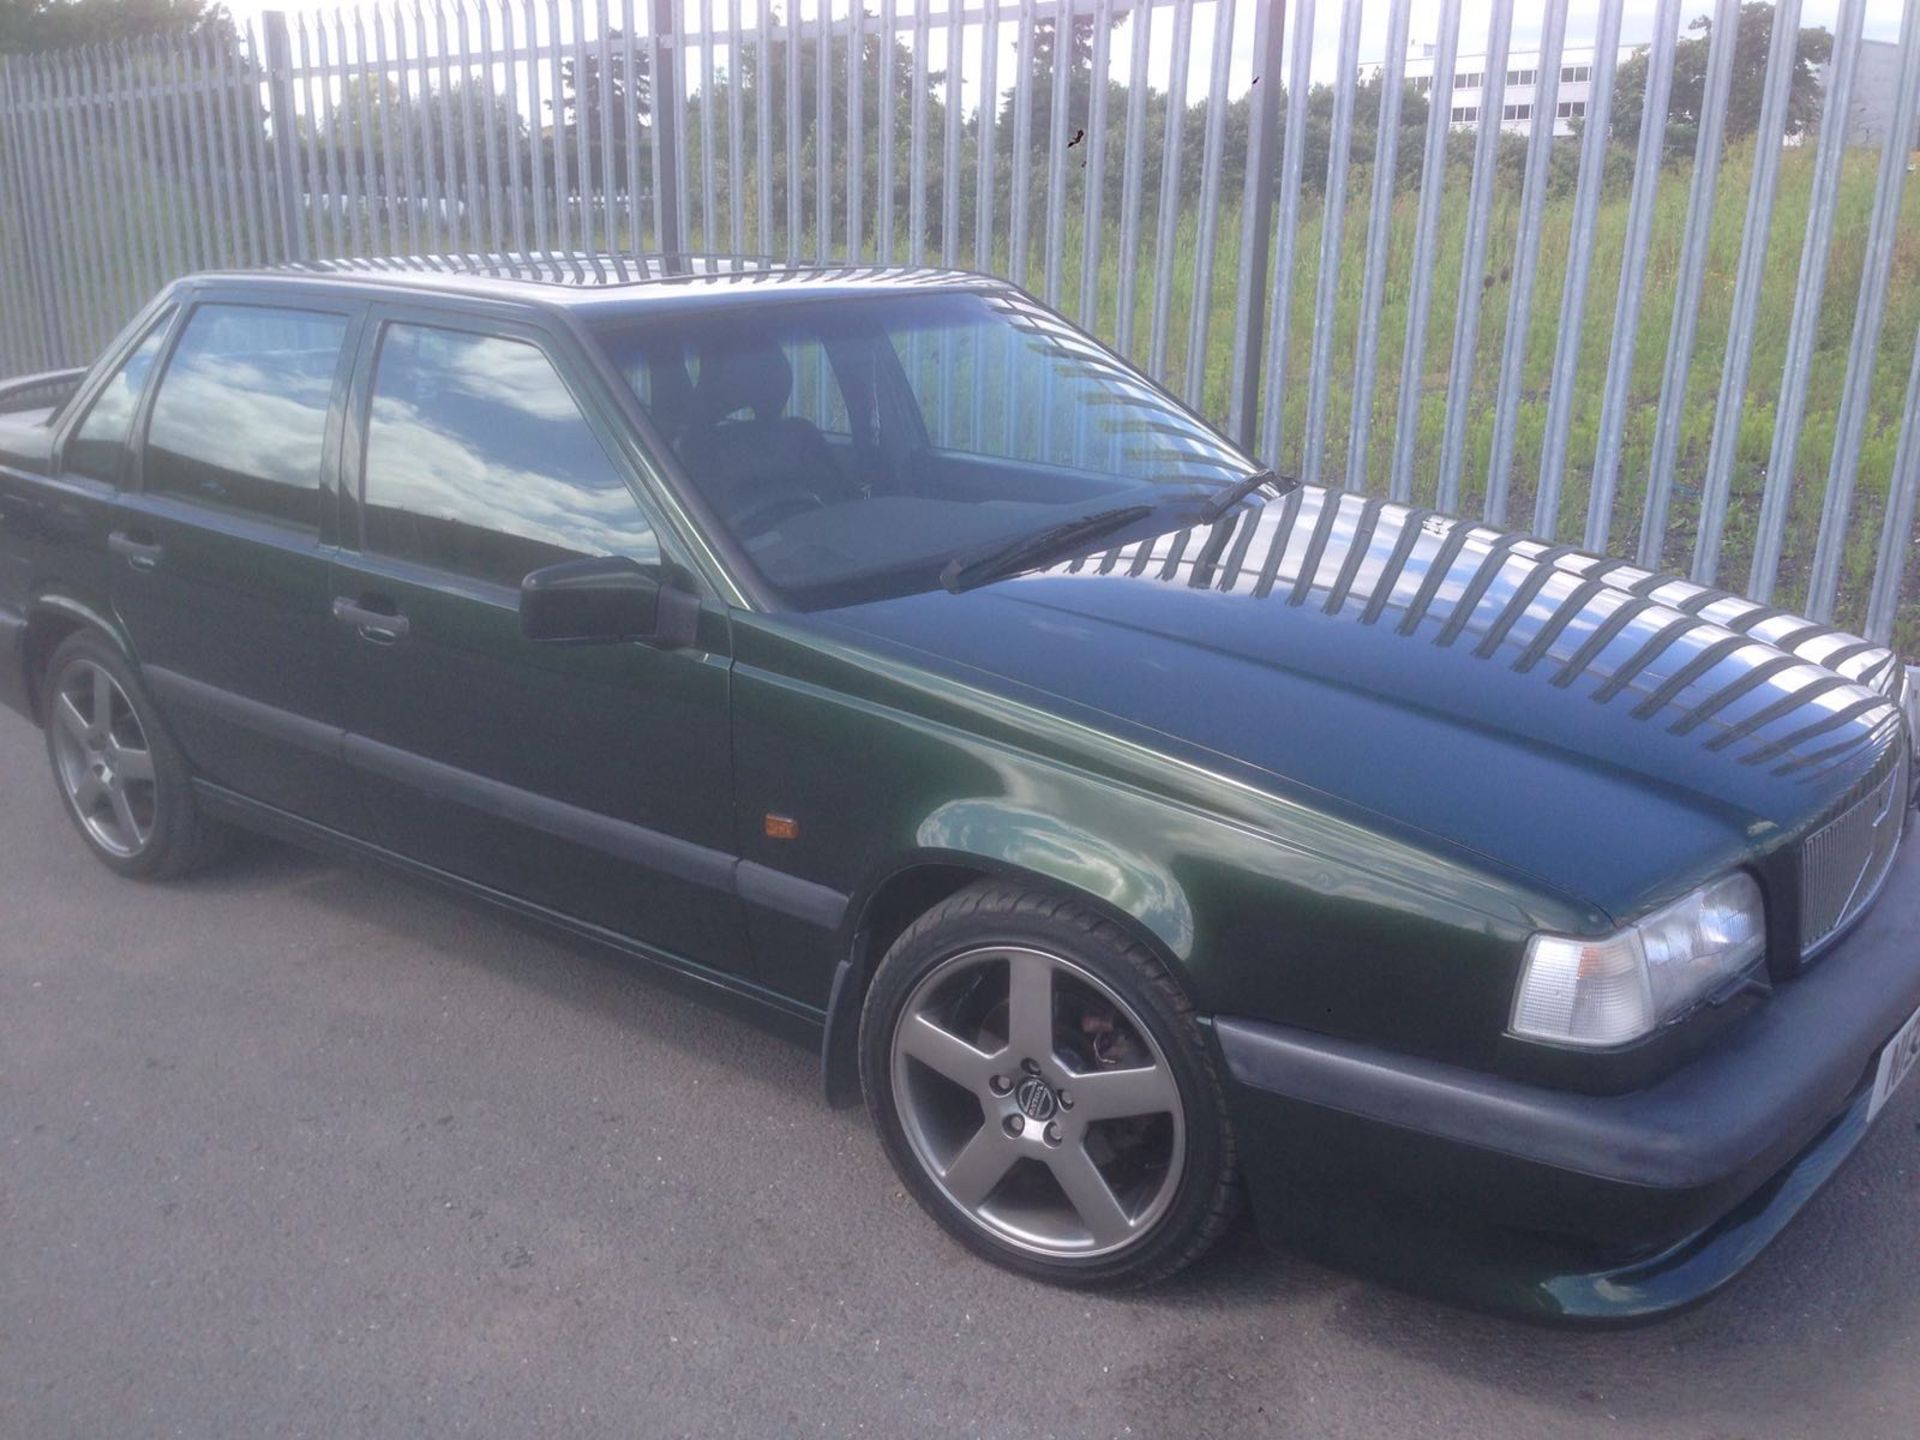 VOLVO T5-R saloon auto, 1995/N. olive green, 2 previous owners from new. - Image 8 of 20